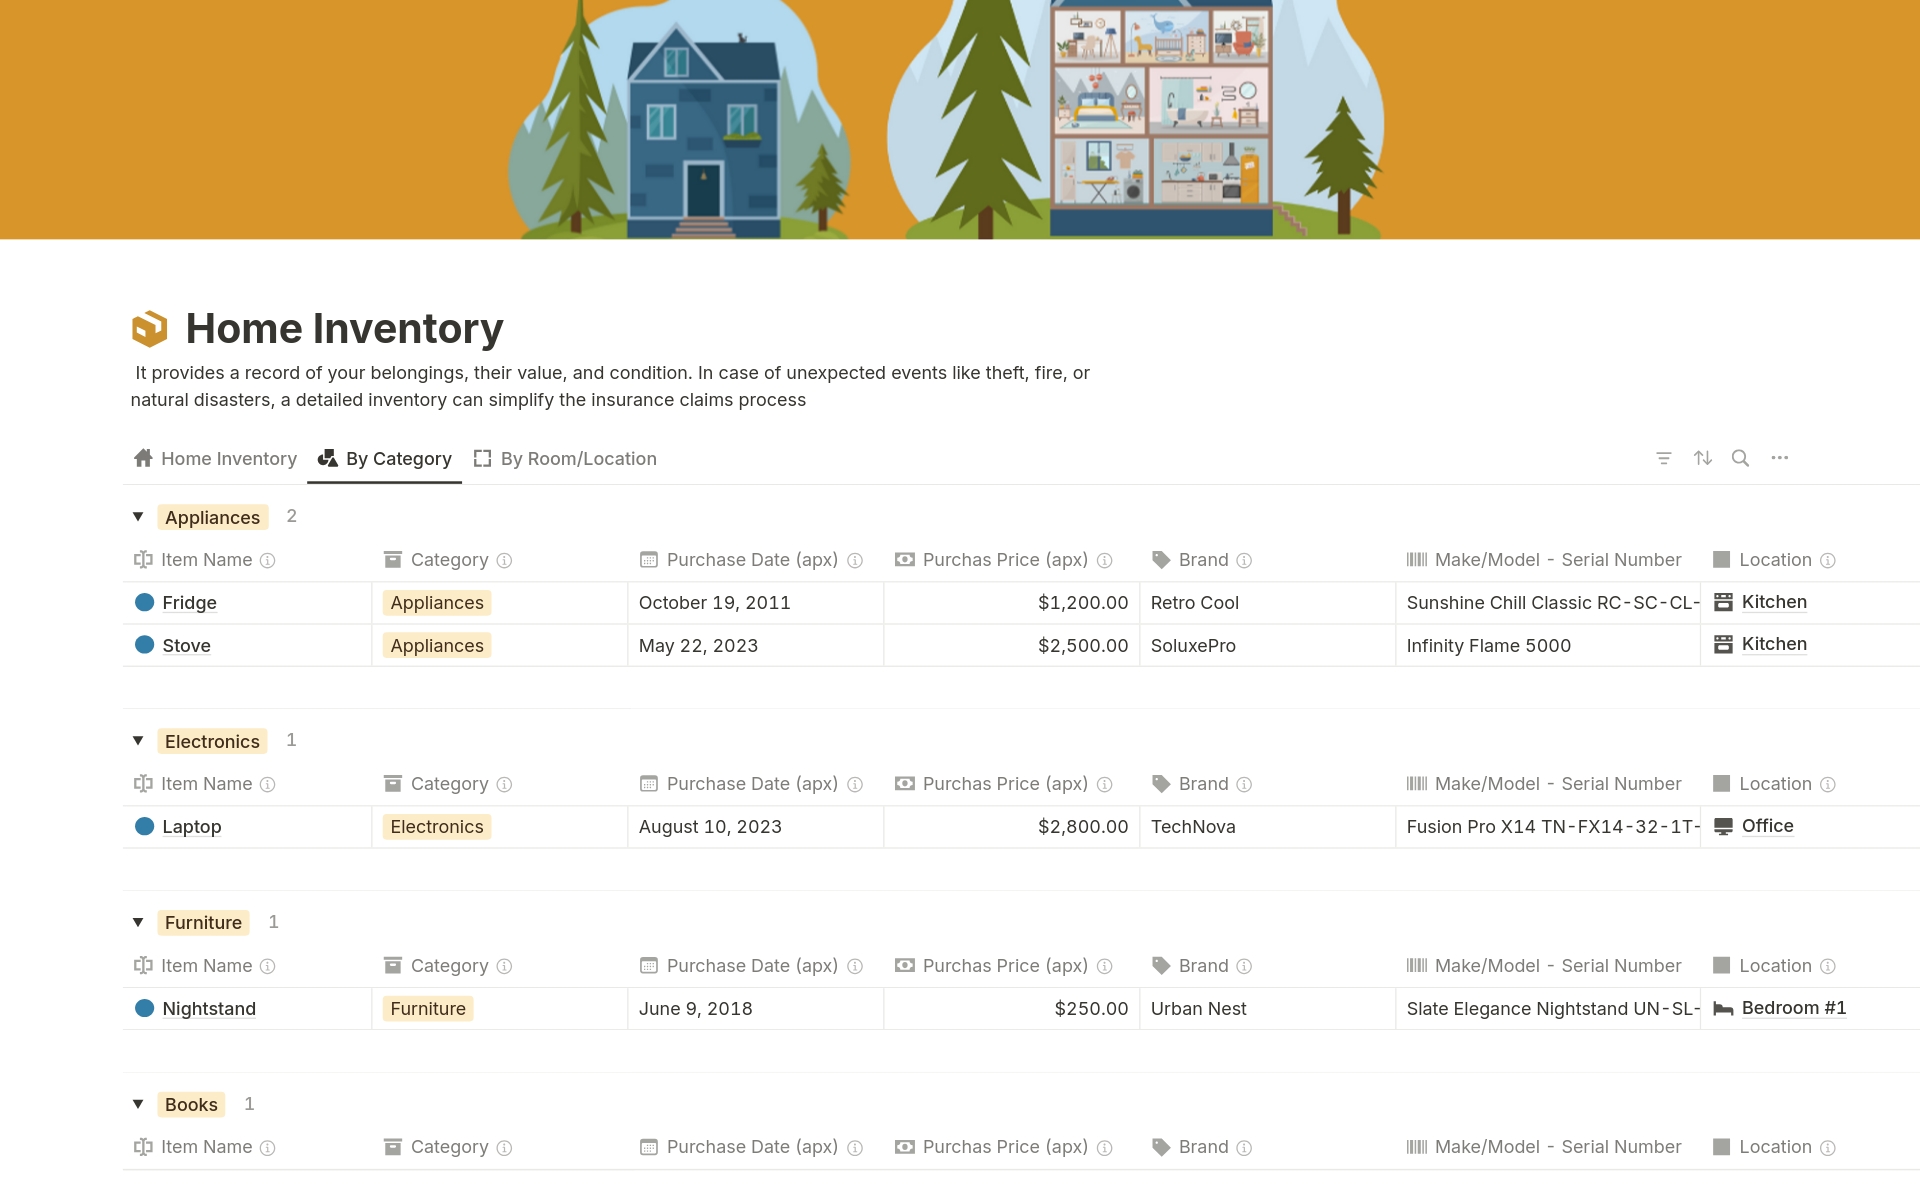 Home Safe Inventory Template: Document your home's items with ease! Track names, categories, brands, serial numbers, locations, purchase details, and attach photos and receipts. Quickly add and filter items by category and room. Stay organized and prepared effortlessly.